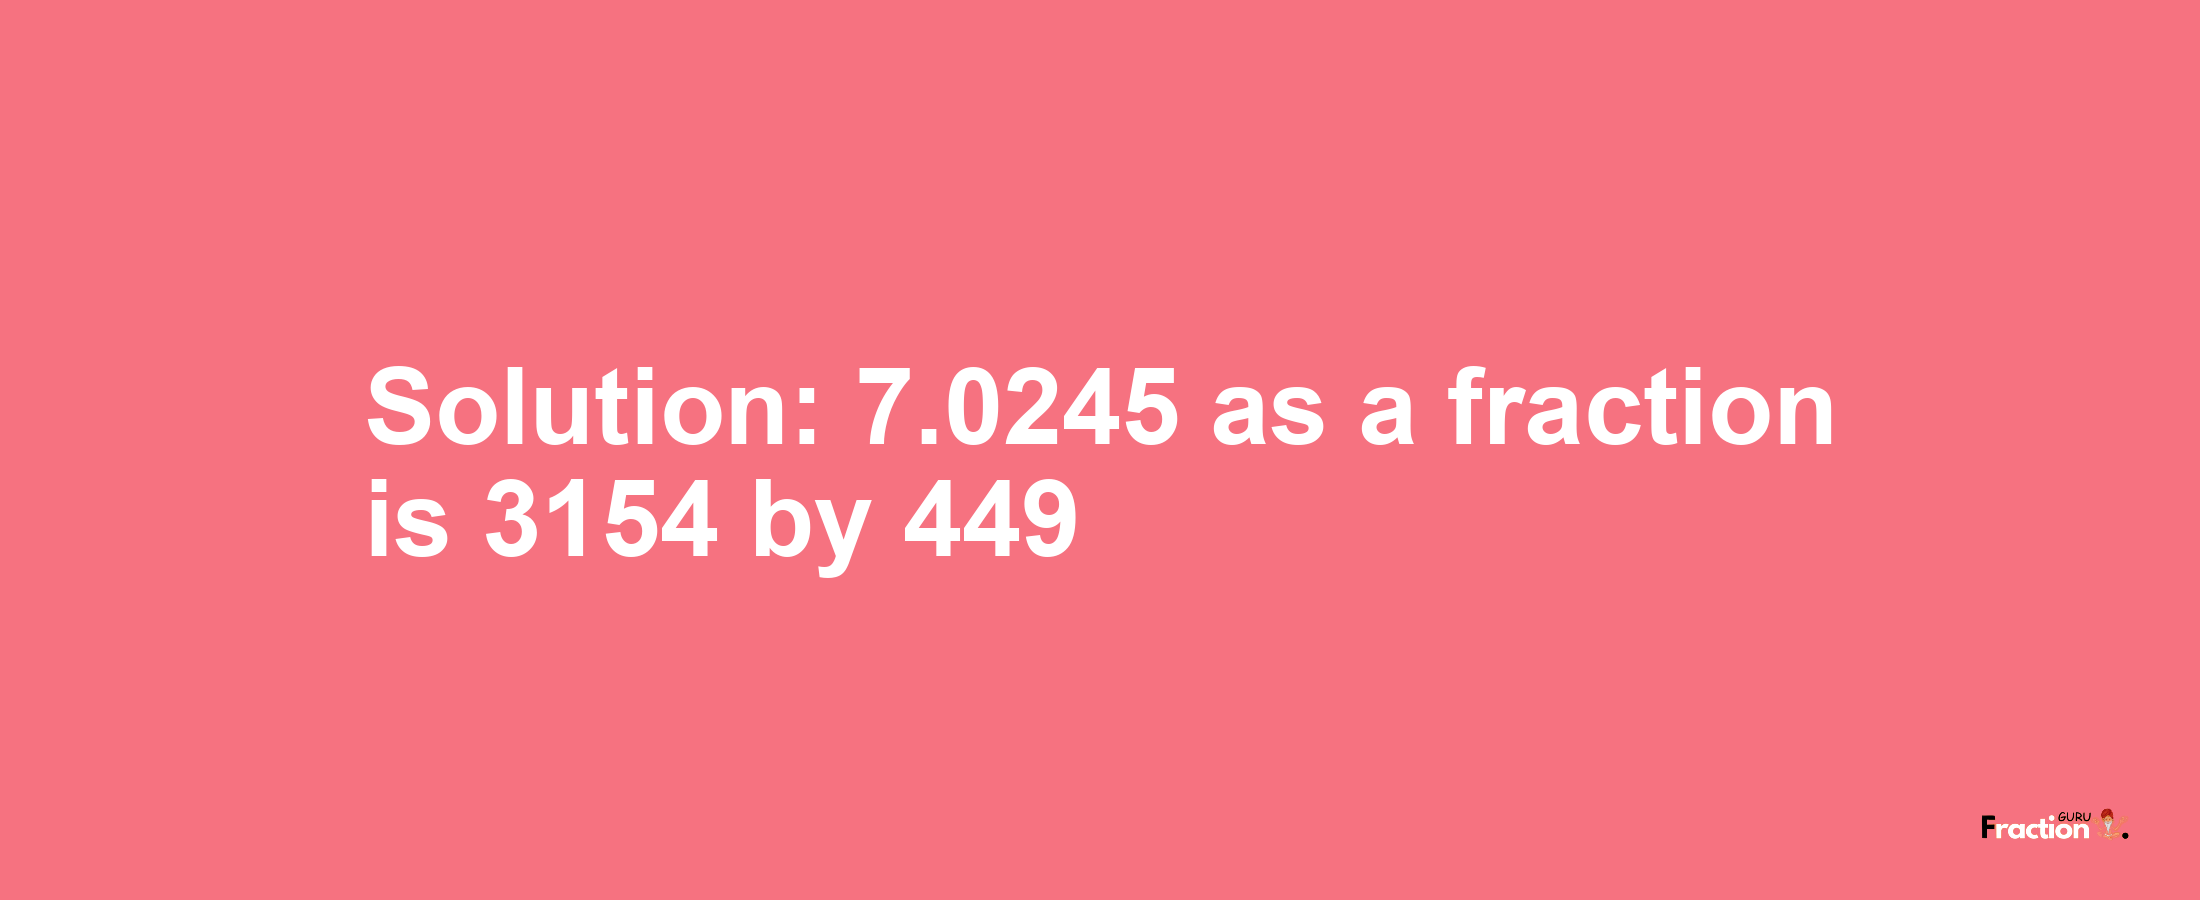 Solution:7.0245 as a fraction is 3154/449